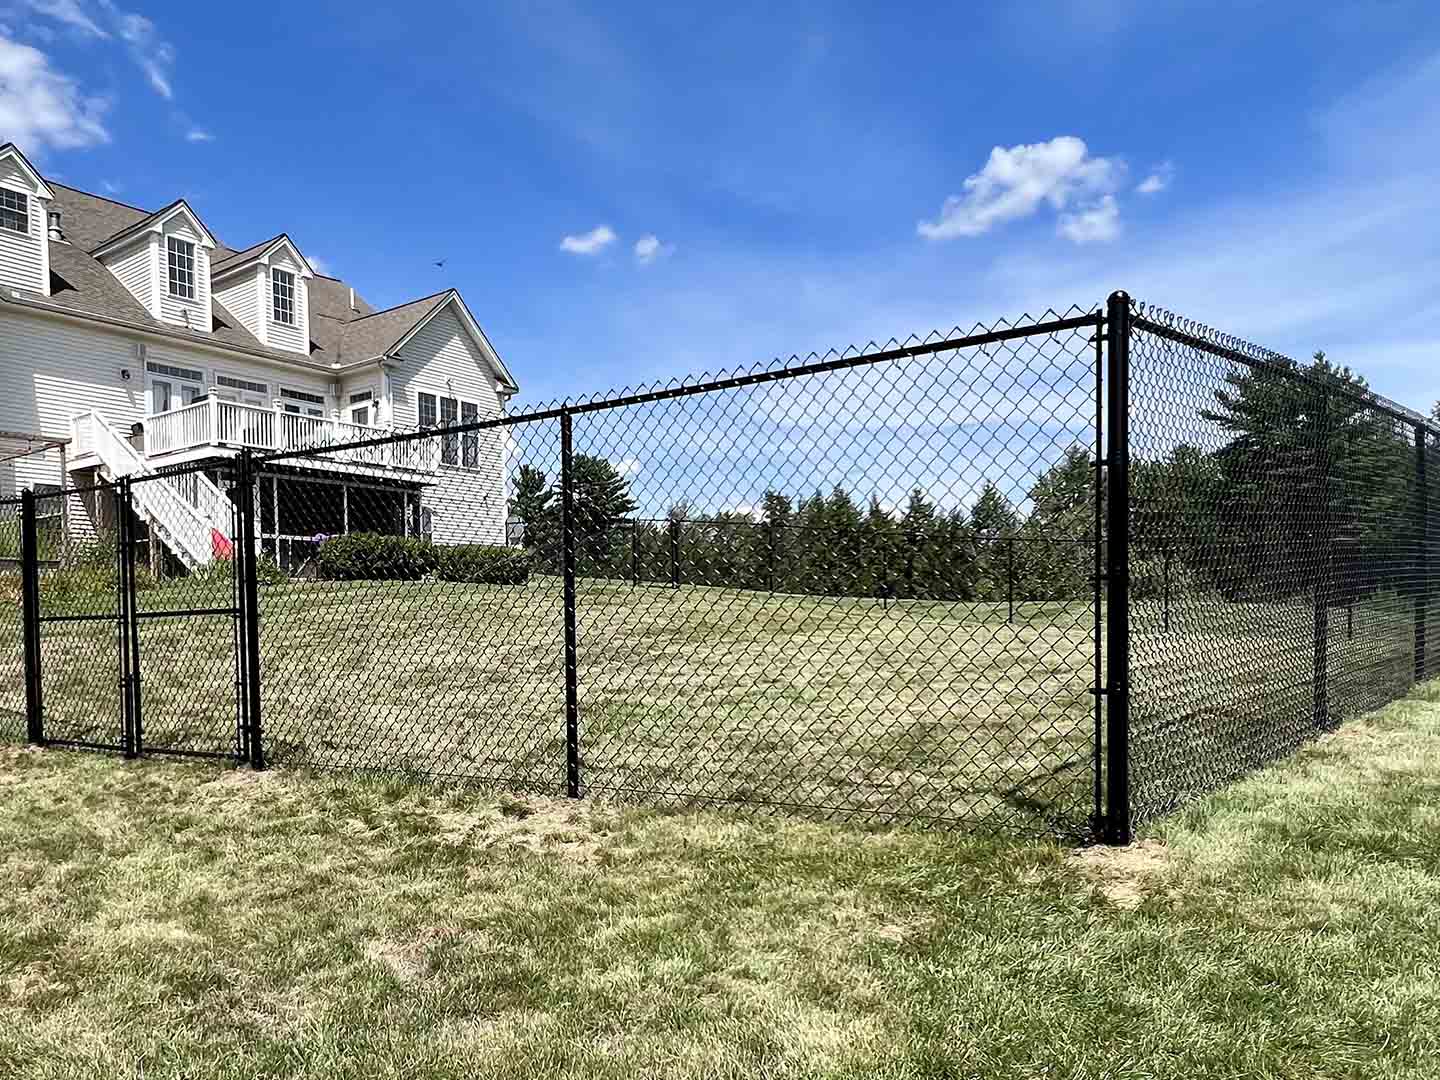 Photo of a New Hampshire chain link fence